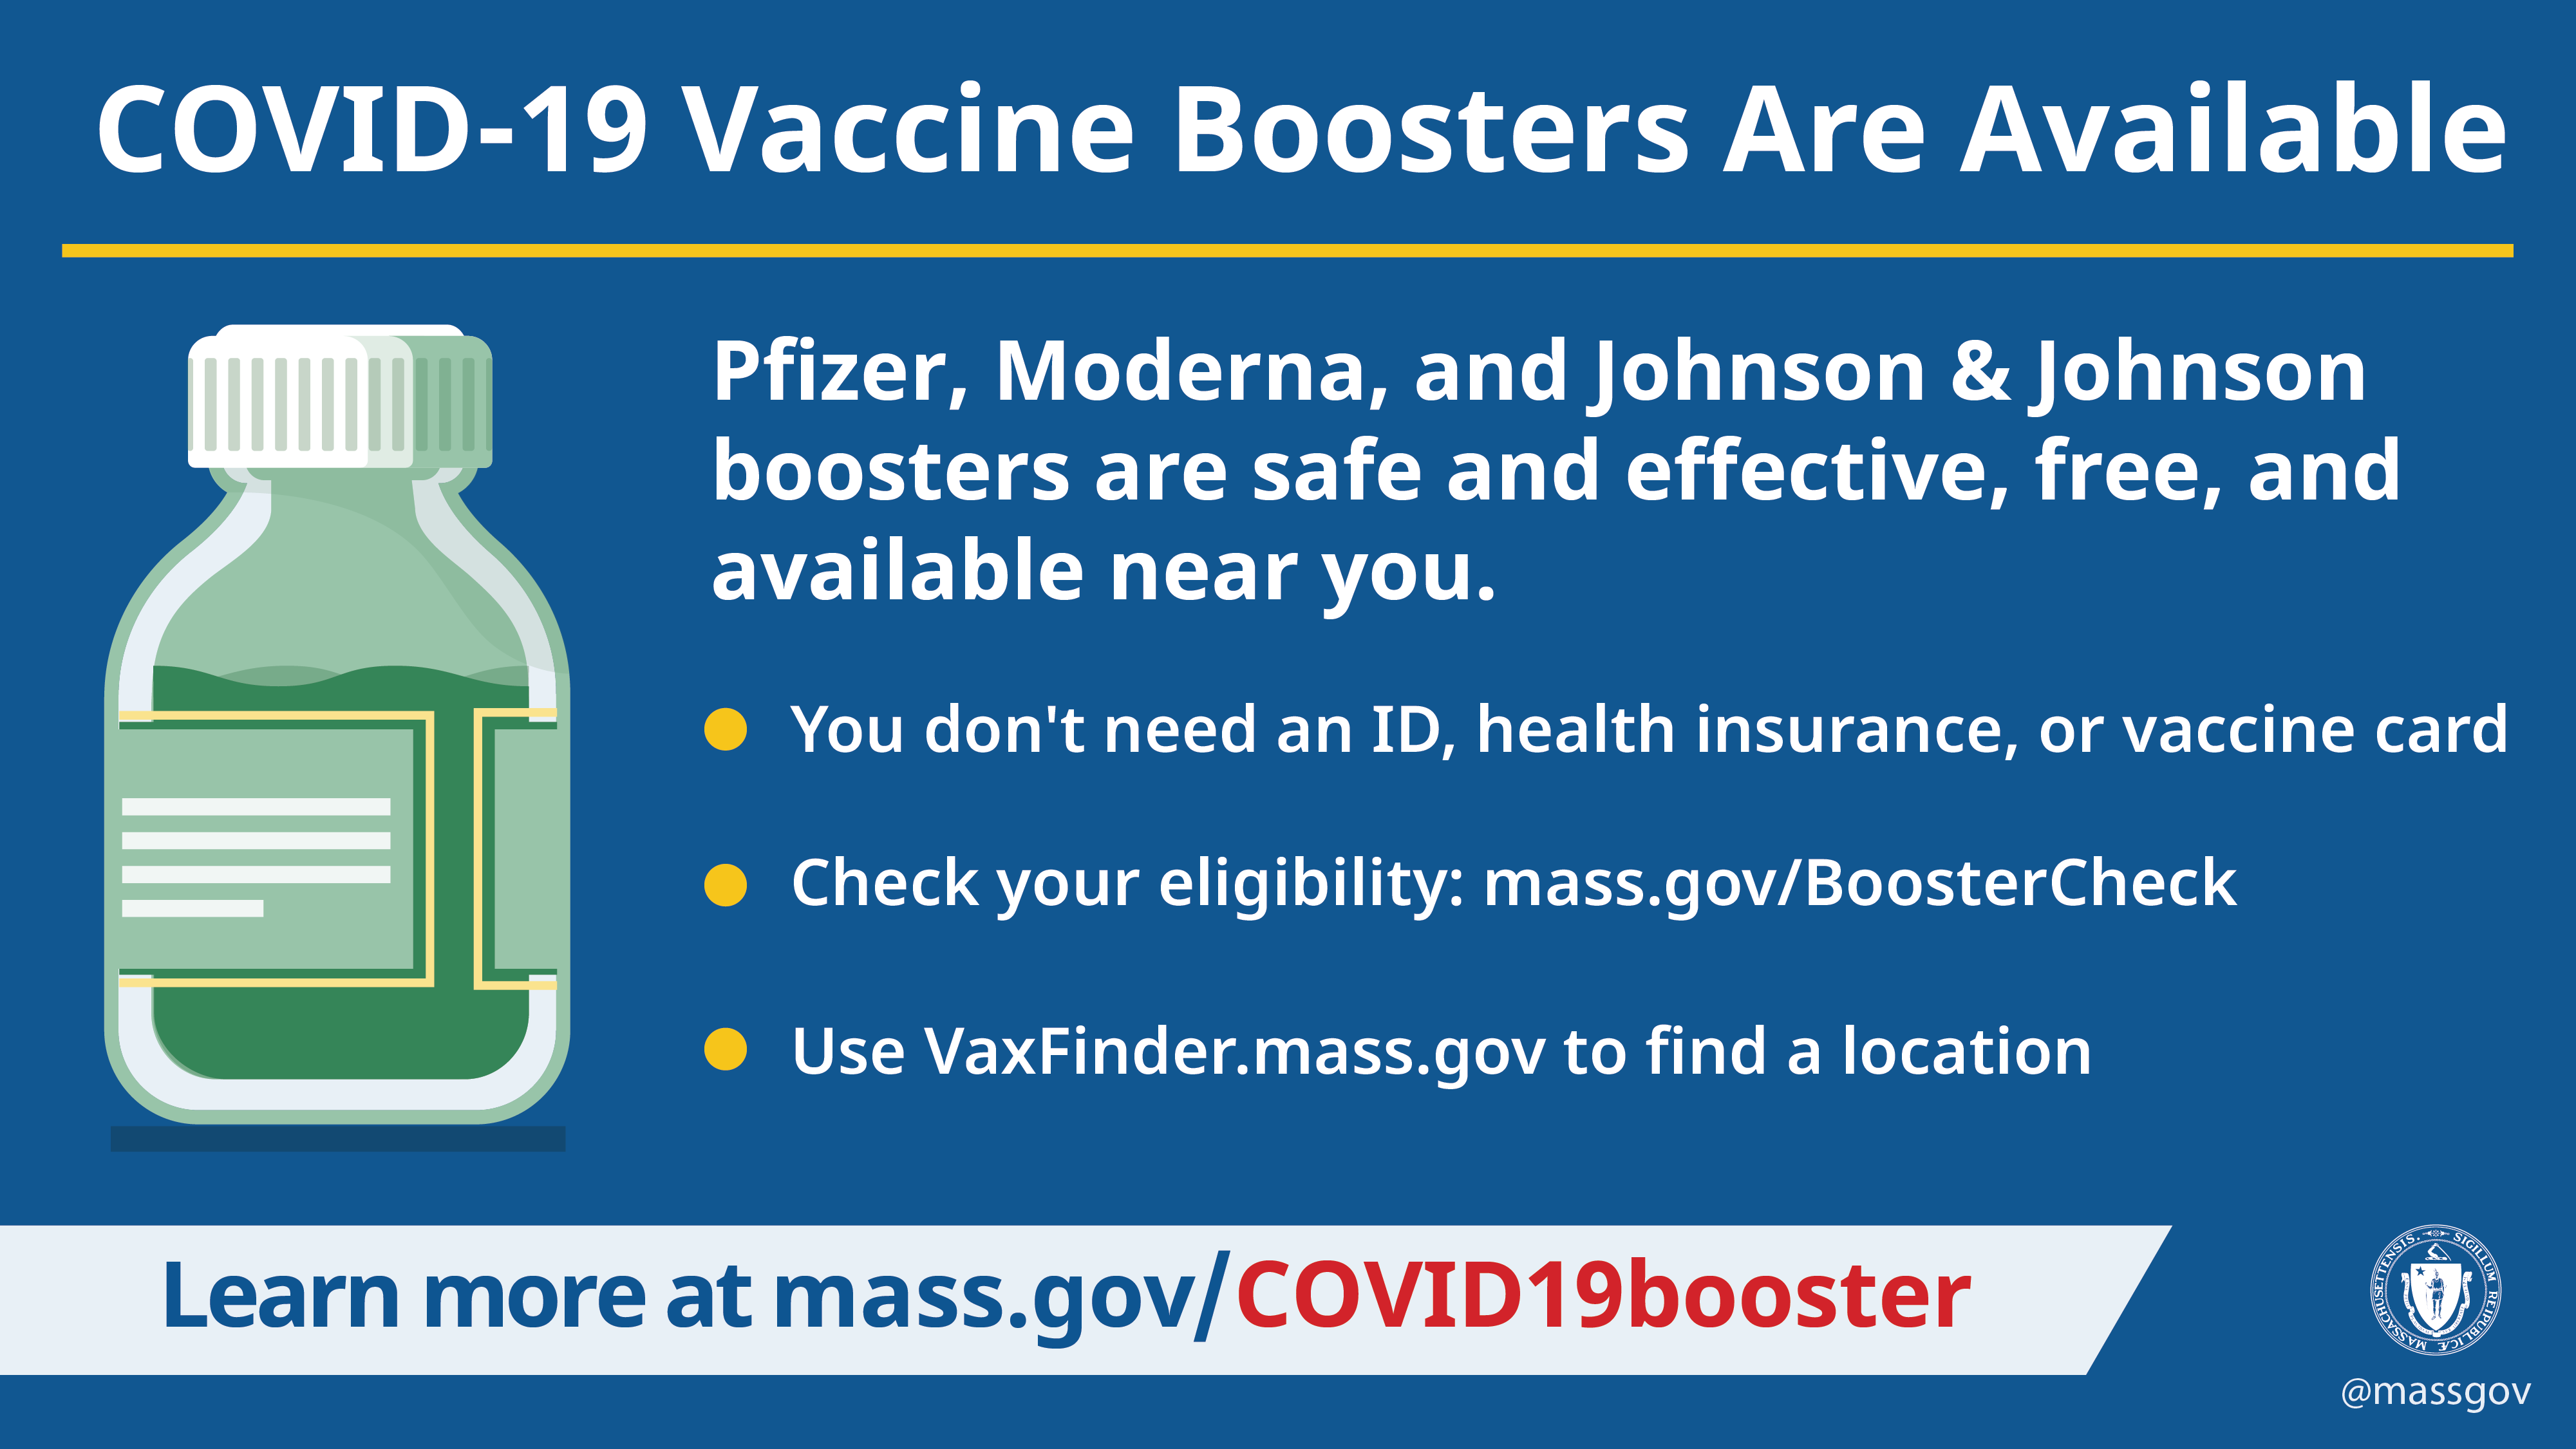 COVID-19 boosters are available. Pfizer, Moderna, and Johnson & Johnson boosters are safe and effective, free, and available near you. You don't need an ID, health insurance, or vaccine card. Use VaxFinder.mass.gov to find a location. Some people are not eligible for a second booster shot. Check to see if you're eligible.